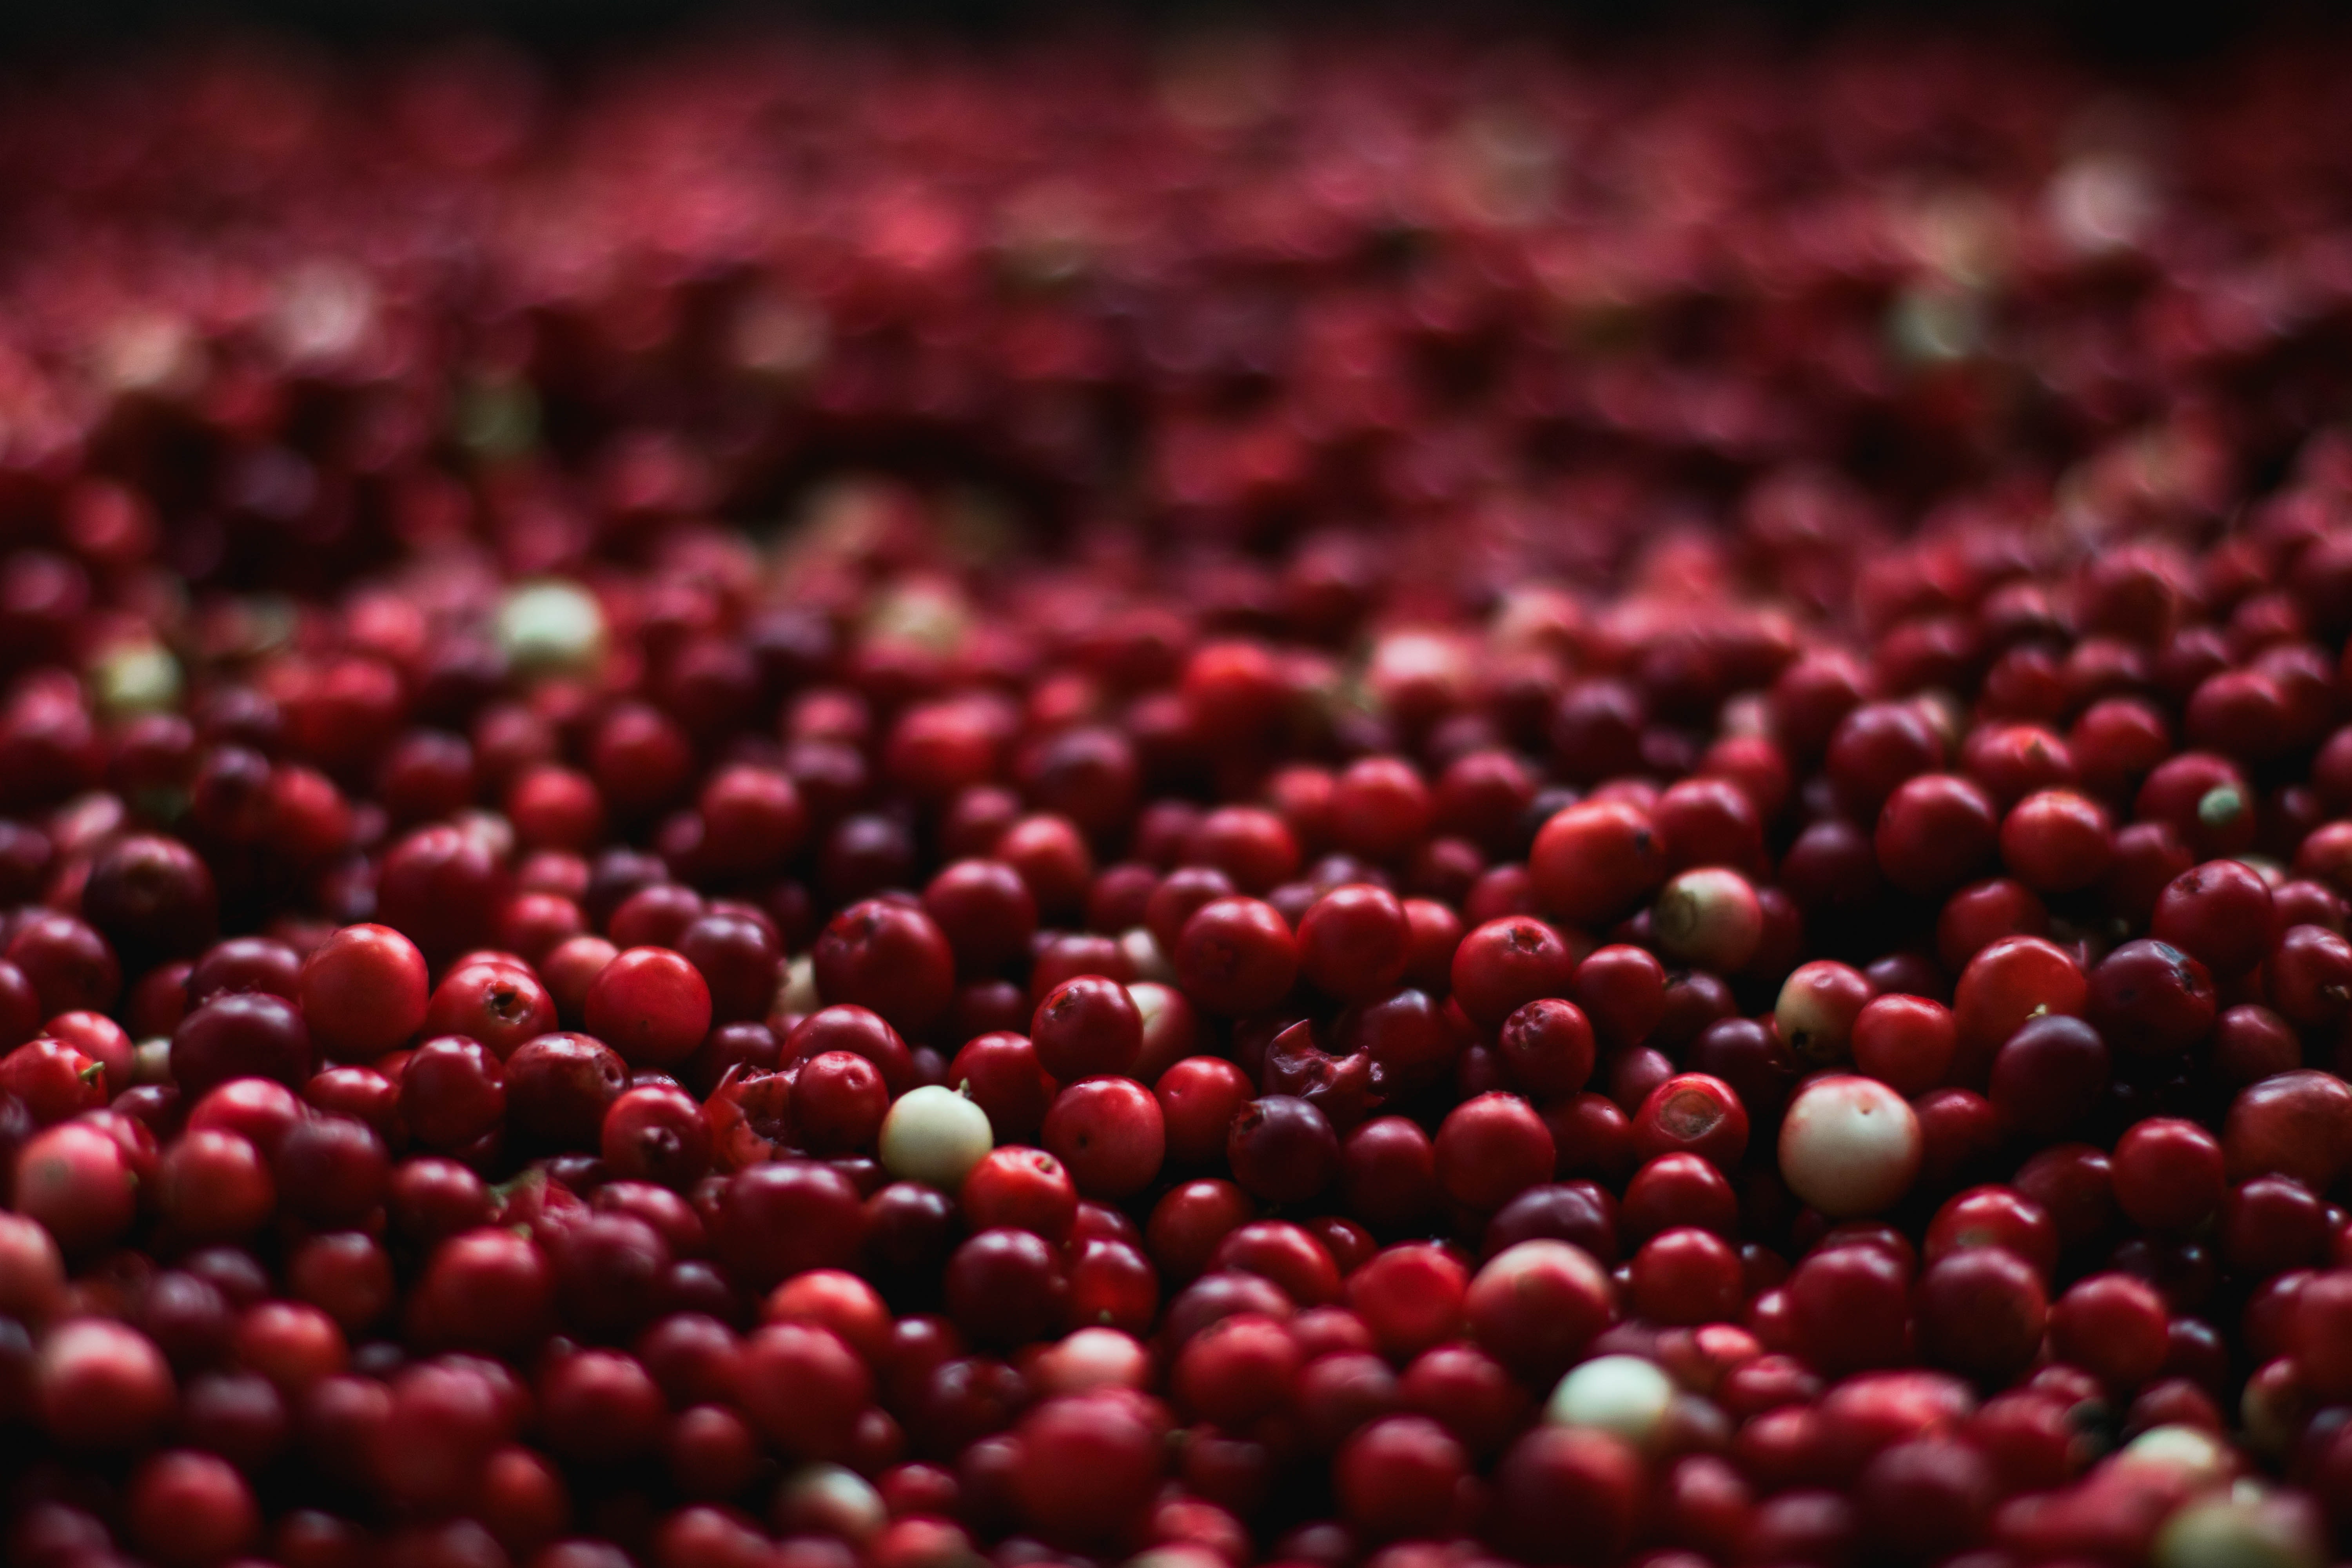 Cranberries: Benefits, nutrition, and risks